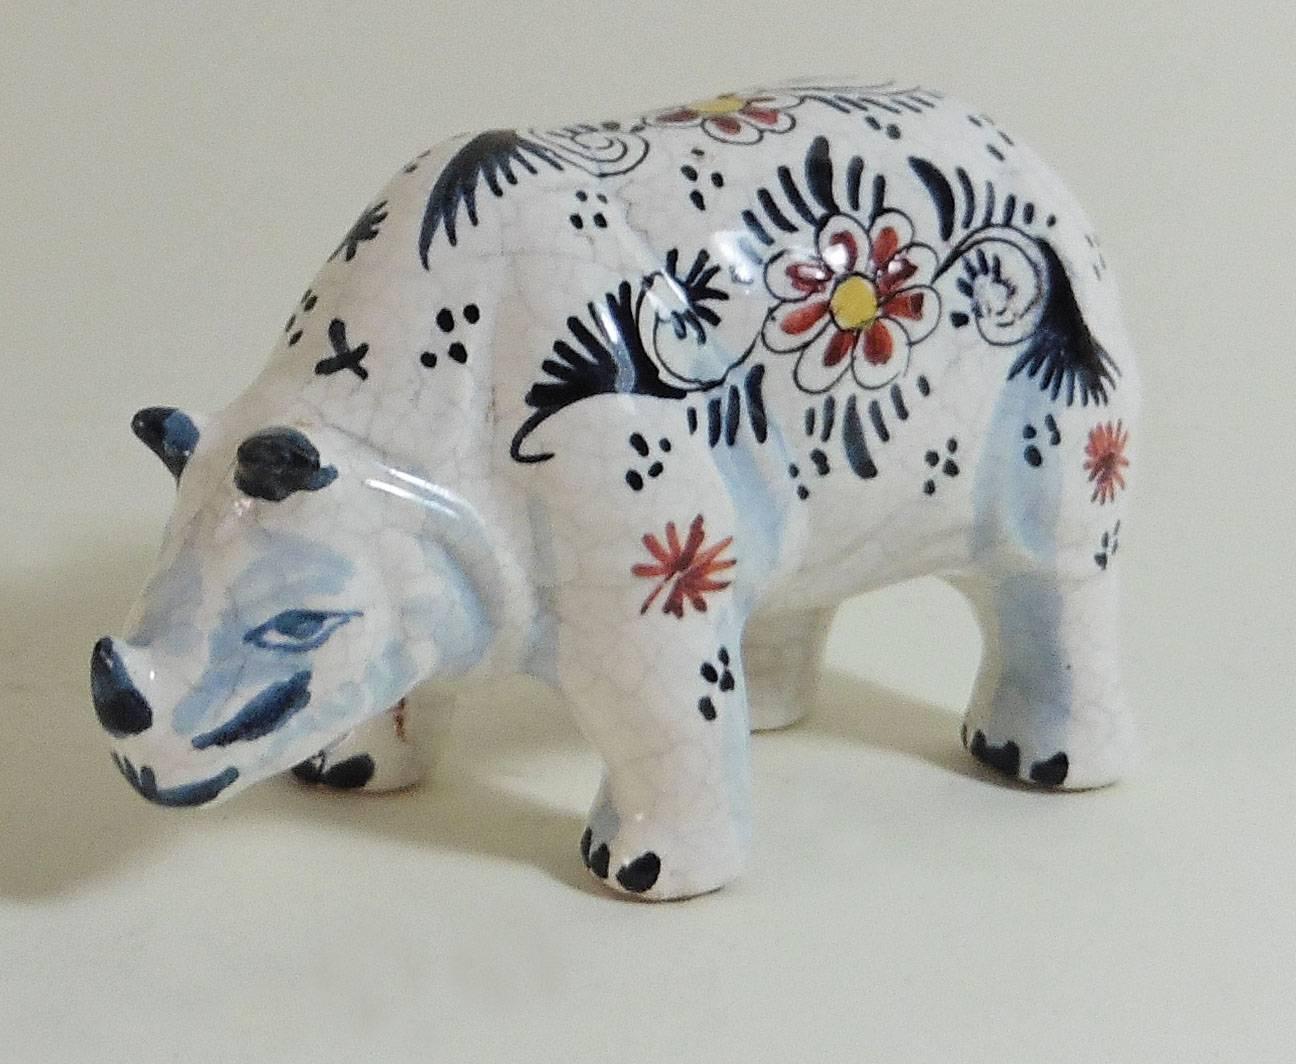 French faience blue and white rhinoceros attributed to Desvres, circa 1910.
Minor hairlines on the glaze.